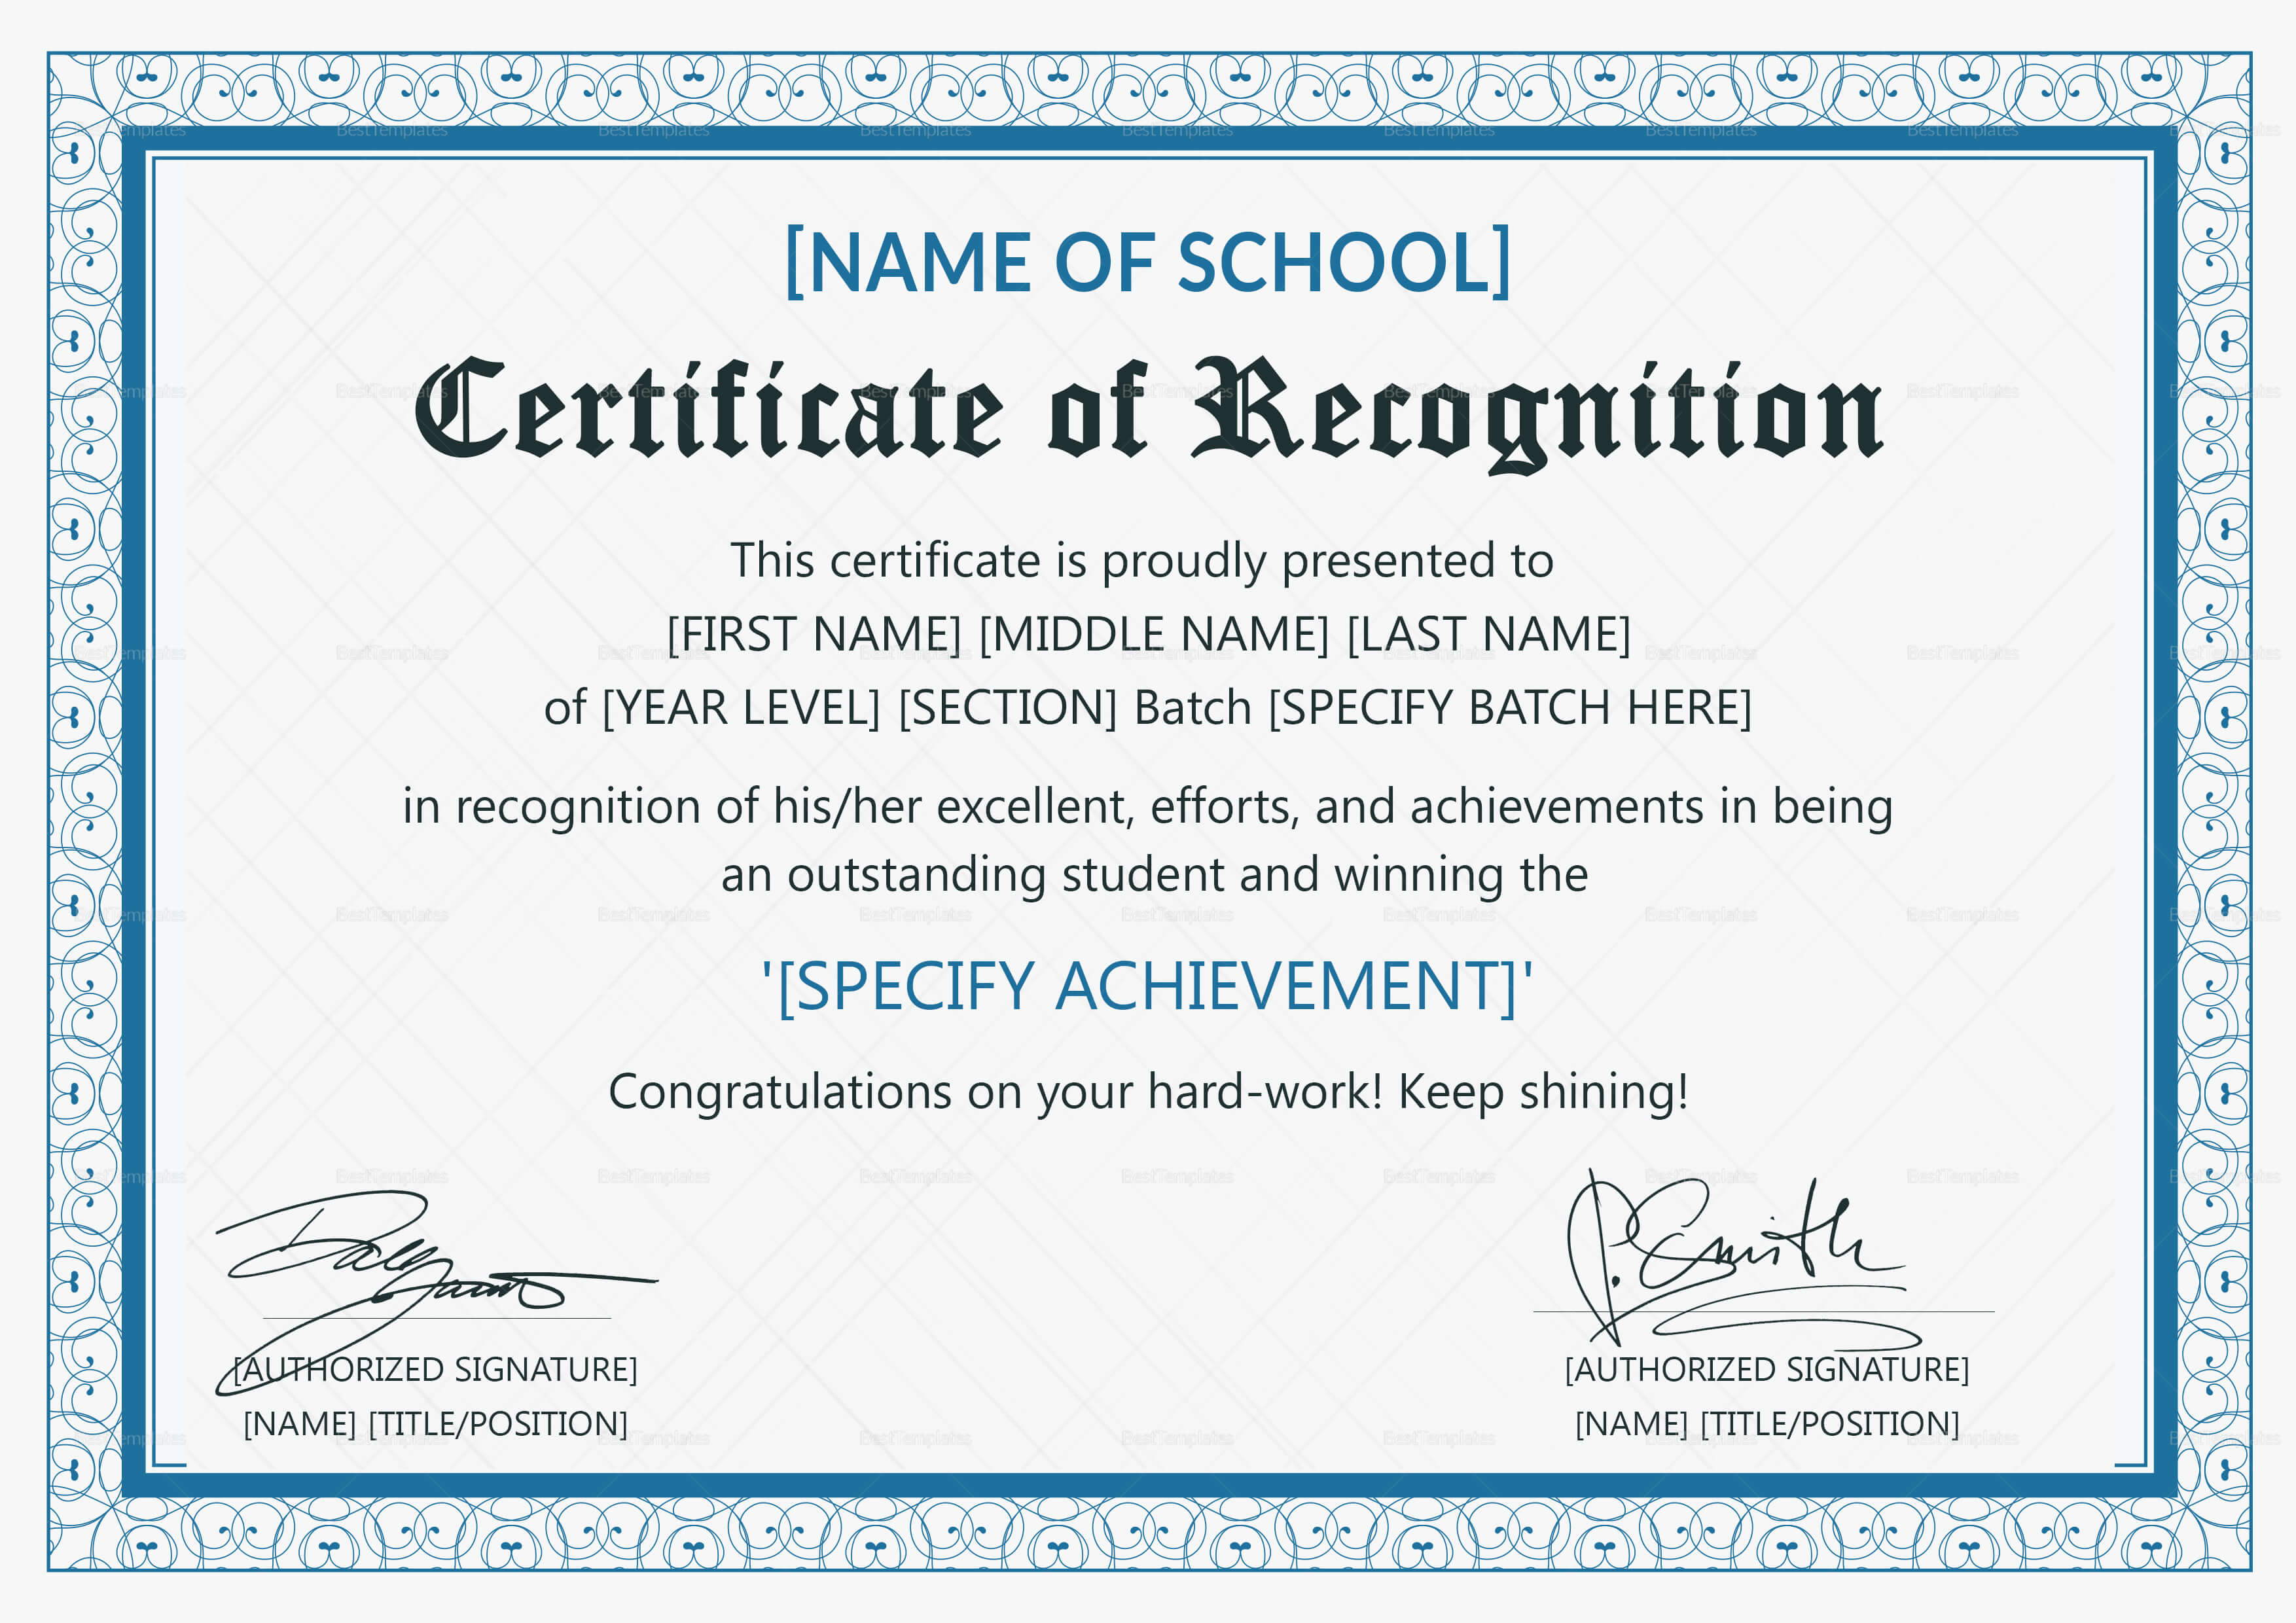 Outstanding Student Recognition Certificate Template With Certificate Templates For School